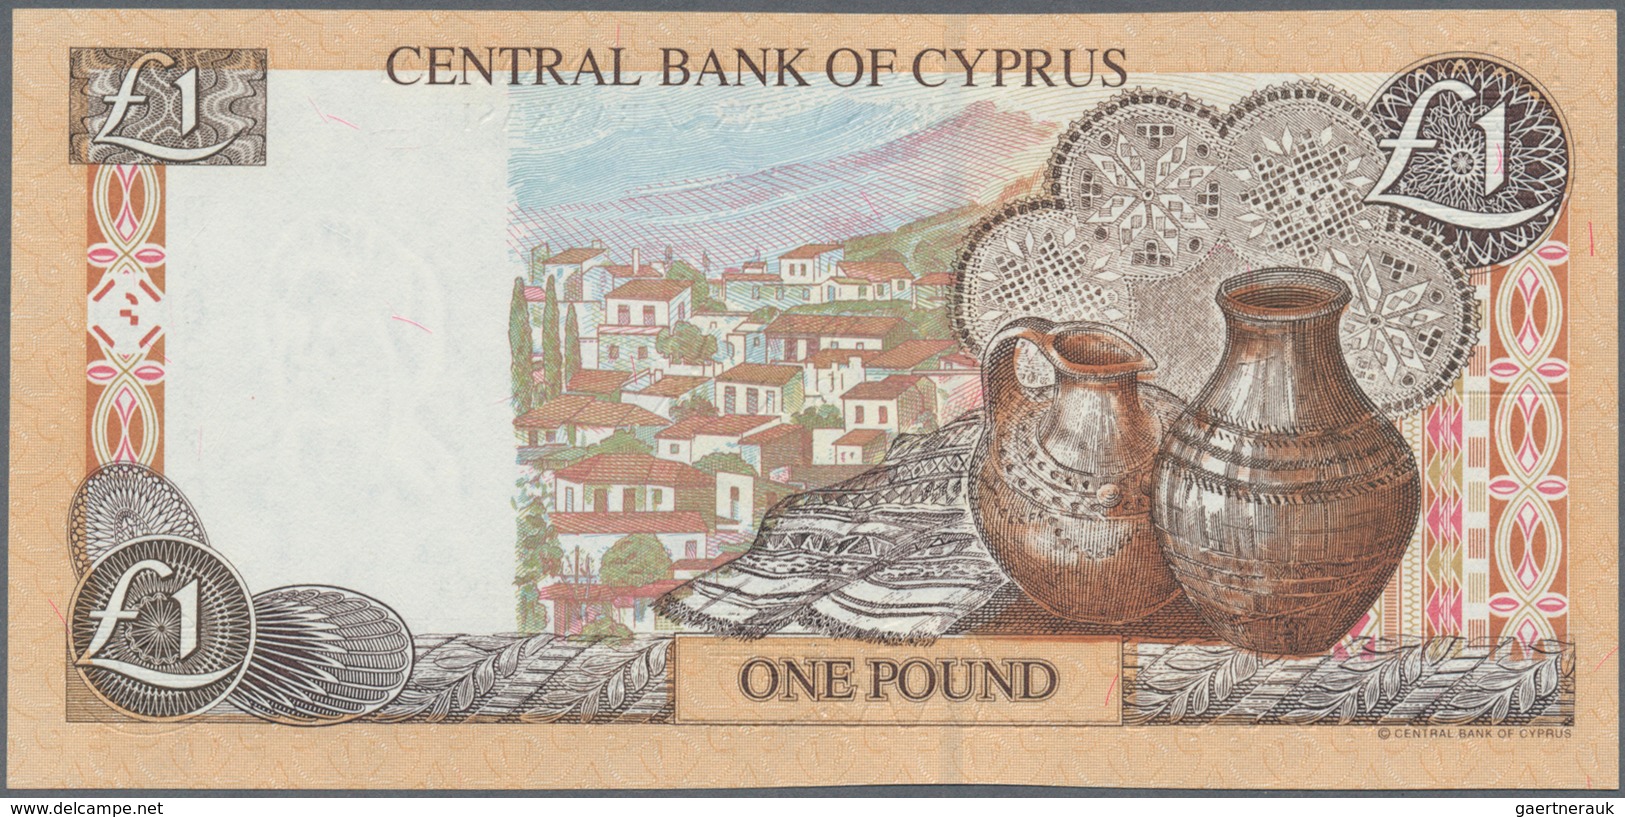 01348 Cyprus / Zypern: set of 4 notes containing 1 Pound 2004 (2x), 5 Pounds 2003 and 10 Pounds 2005, in c